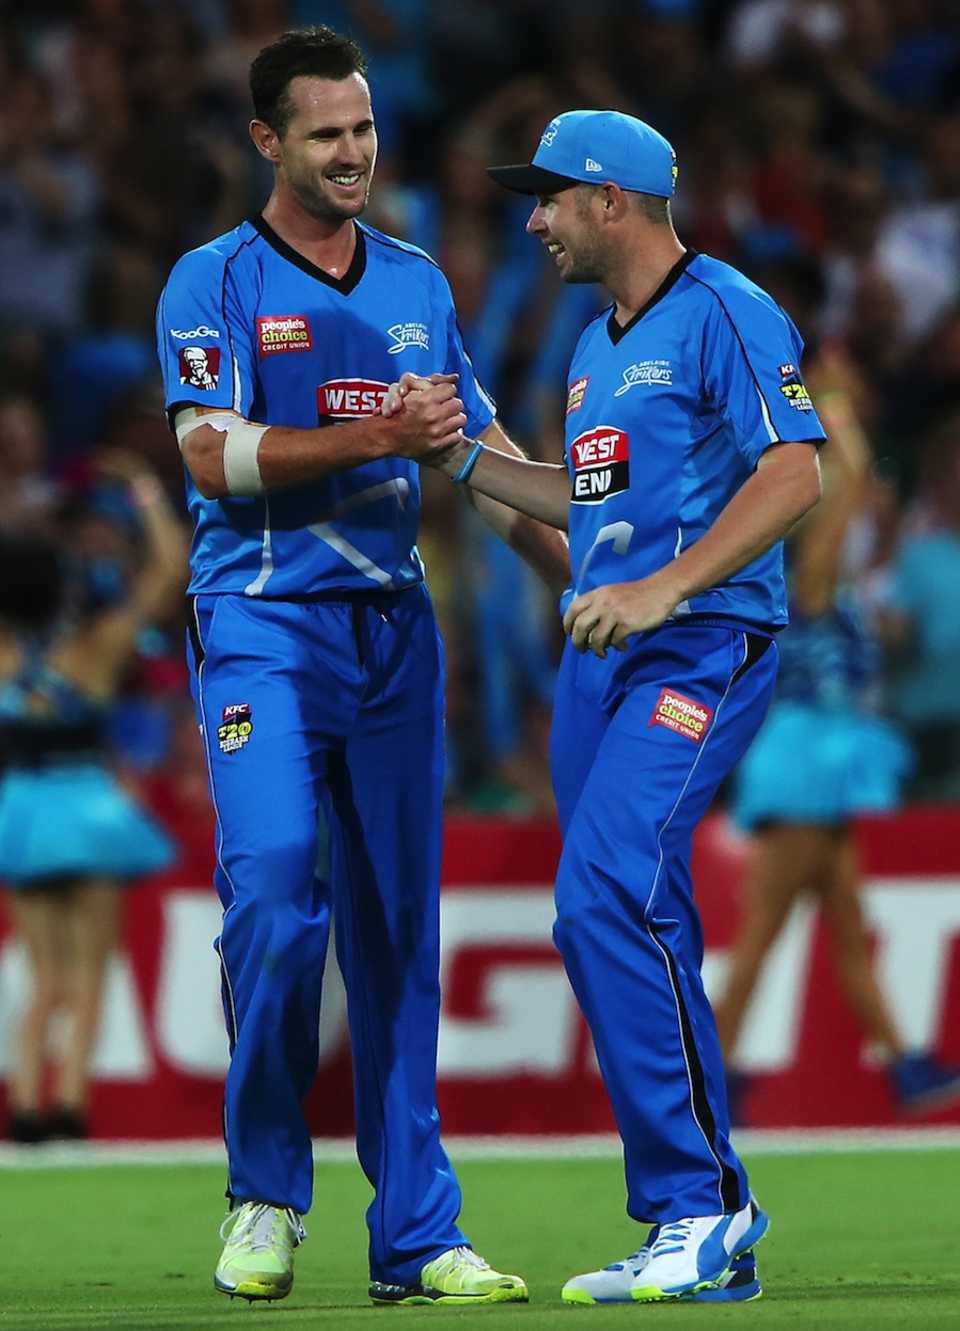 Shaun Tait is congratulated after taking a wicket